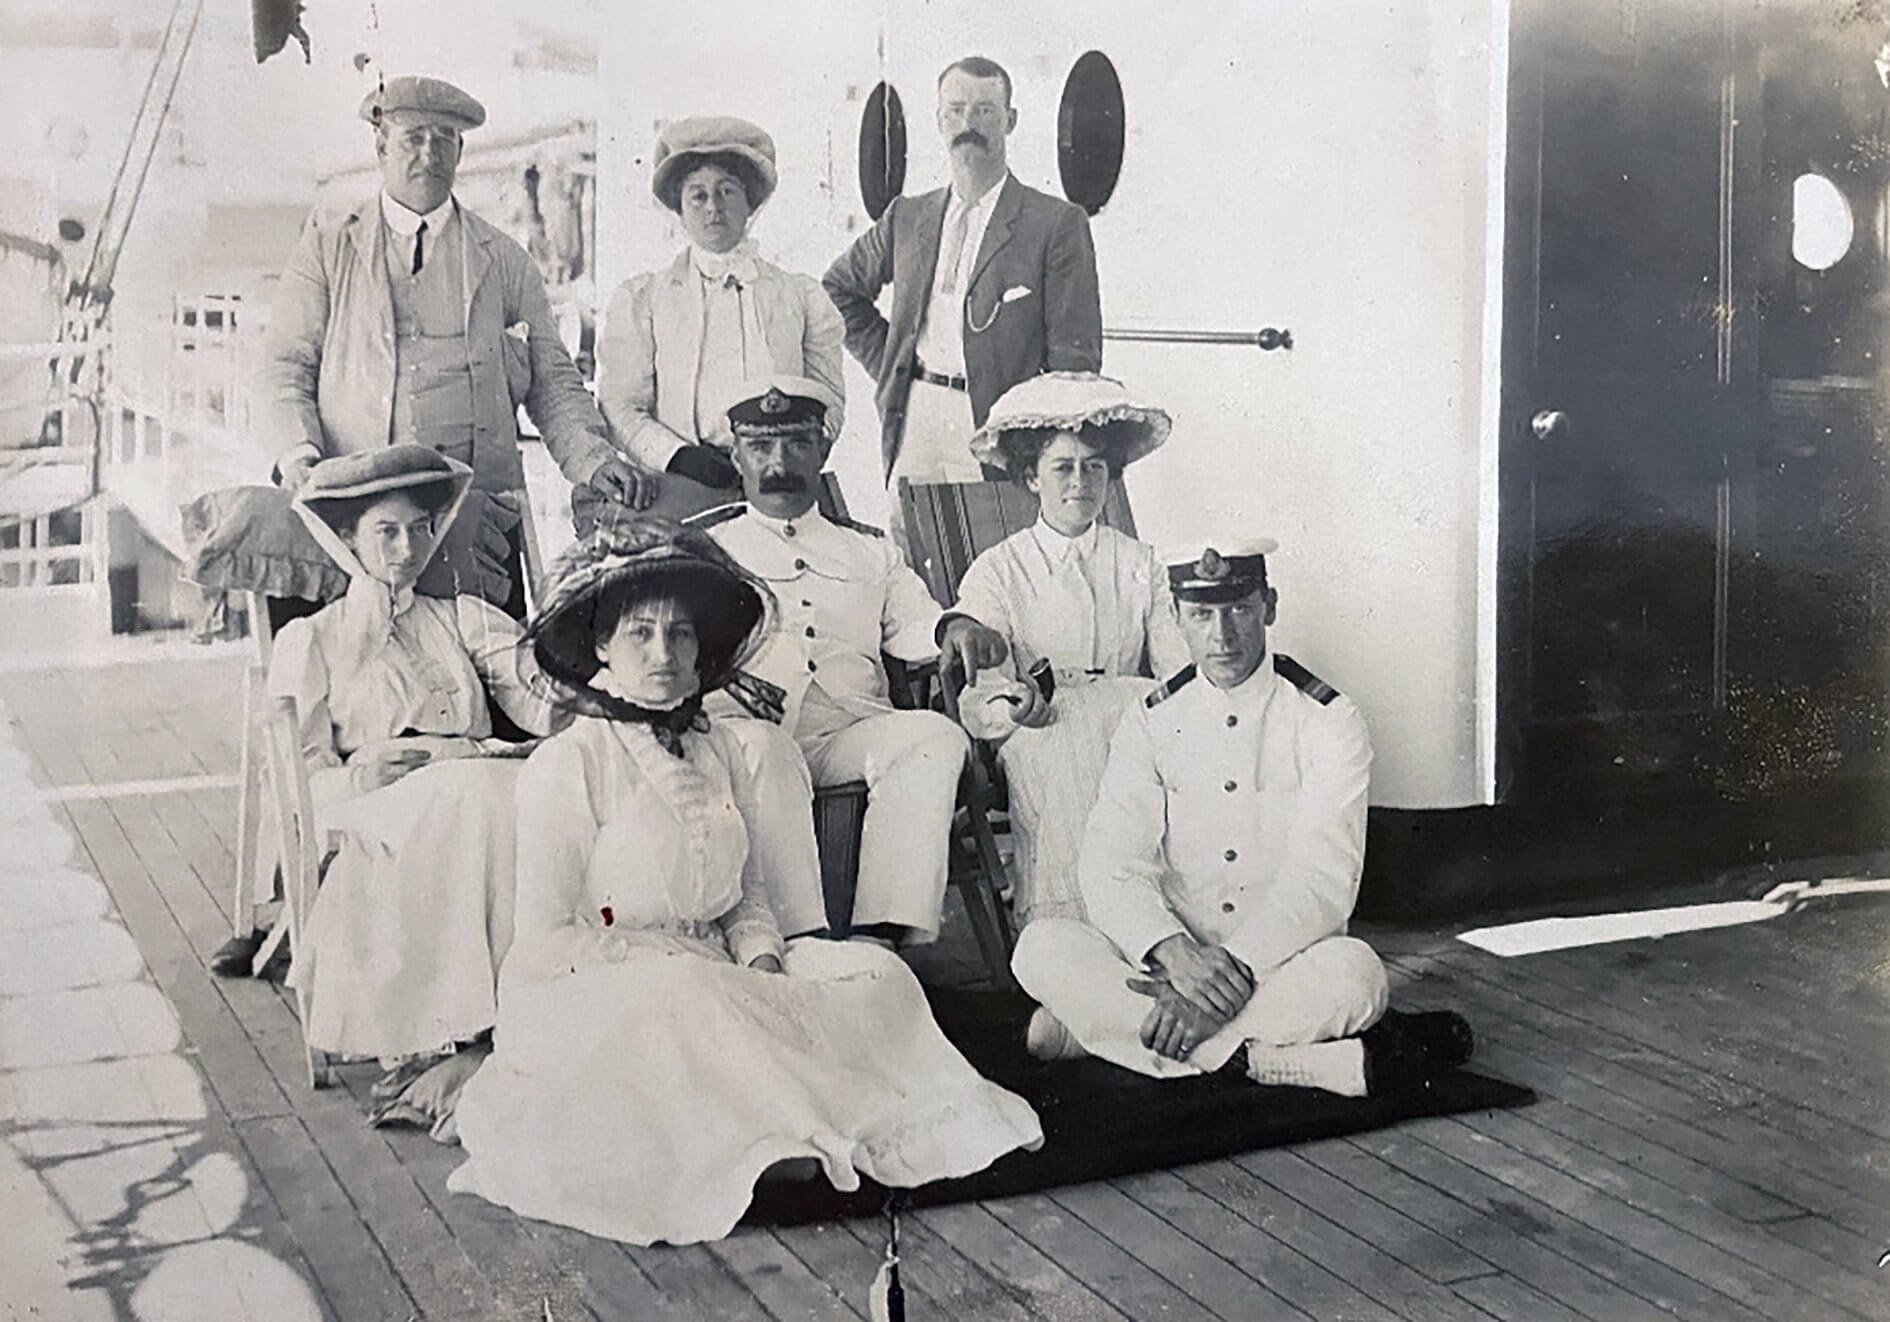 Captain Charles Stark, seated centre. 

Rare documents revealing how the shameless owners of the Titanic portrayed themselves as the victims and lauded their chairman who controversially survived the disaster have sold for £12,500.

The minutes for a special board meeting held in the wake of the tragedy show how bosses of White Star Line were more concerned with themselves than the victims. 

They were particularly worried about the psychological effect the ordeal would have on Bruce Ismay, who became known as the 'coward of the Titanic'.

Mr Ismay, the chairman of White Star Line, survived the tragedy by deserting the liner and taking a place in a lifeboat. In James Cemeron's 1997 blockbuster movie, Ismay was portrayed as bullying the crew to go faster only to sneak into a lifeboat as the ship went down after it hit an iceberg.

The minutes were part of an archive which went under the hammer with auctioneers Henry Aldridge & Son, of Devizes, Wilts.